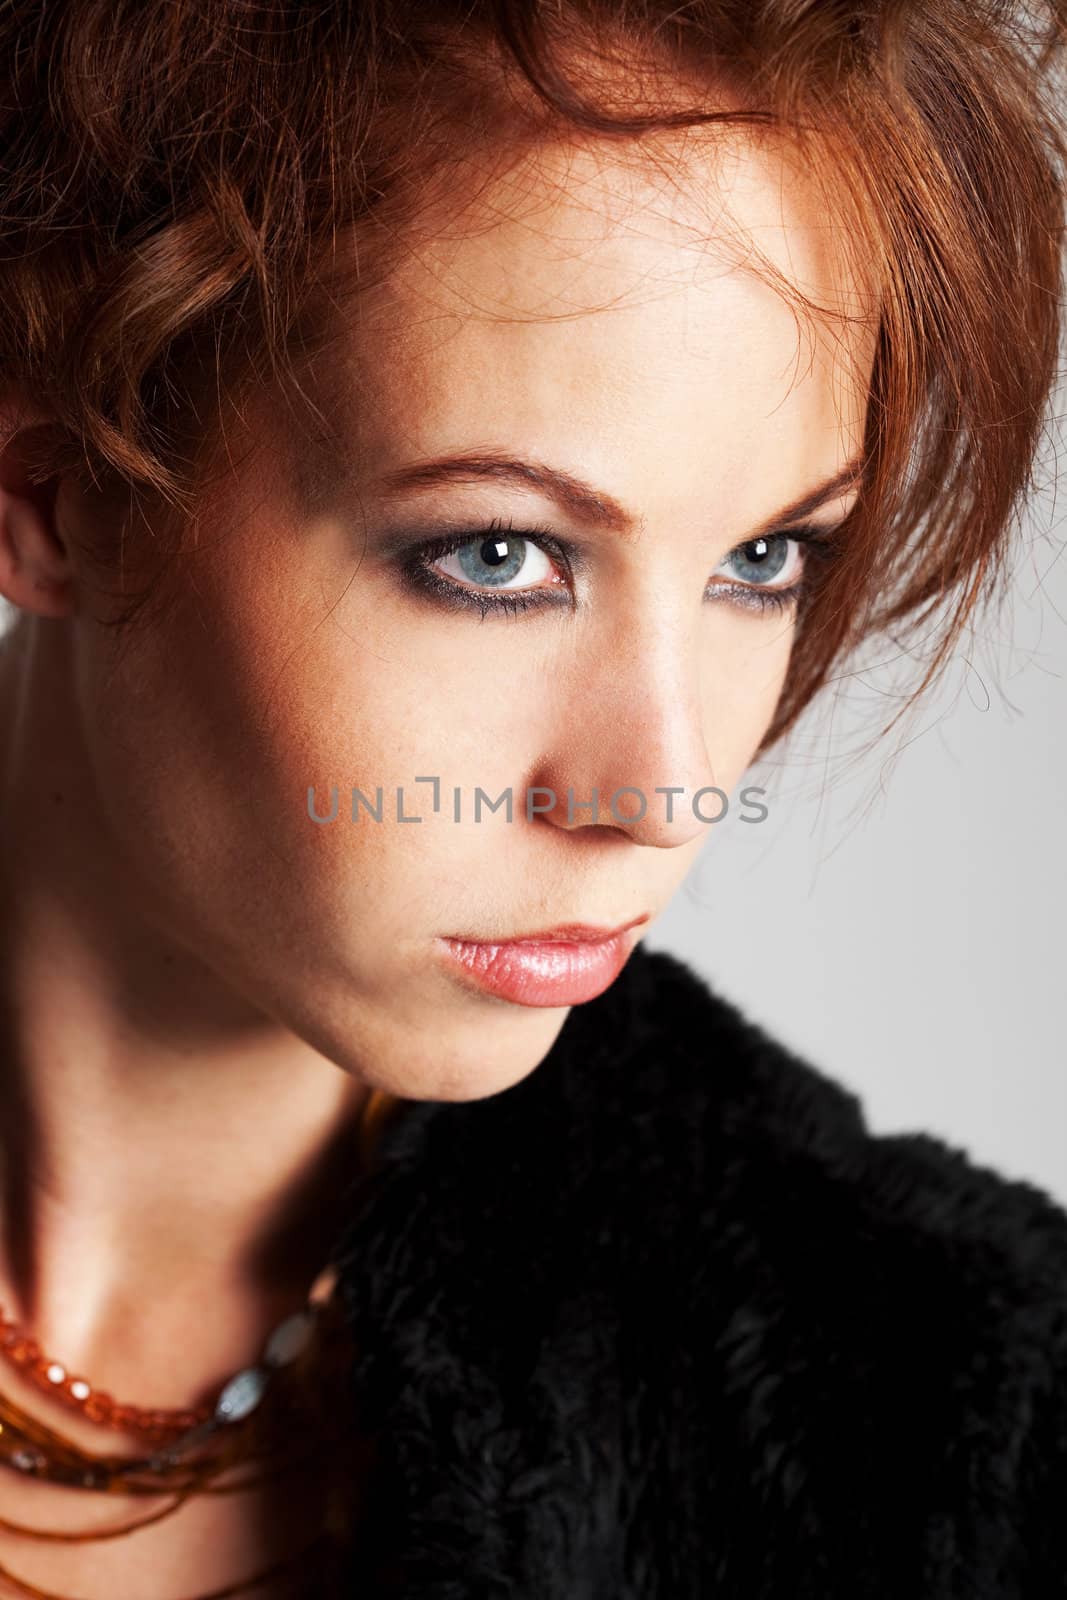 Beautiful woman with red hair and intense look